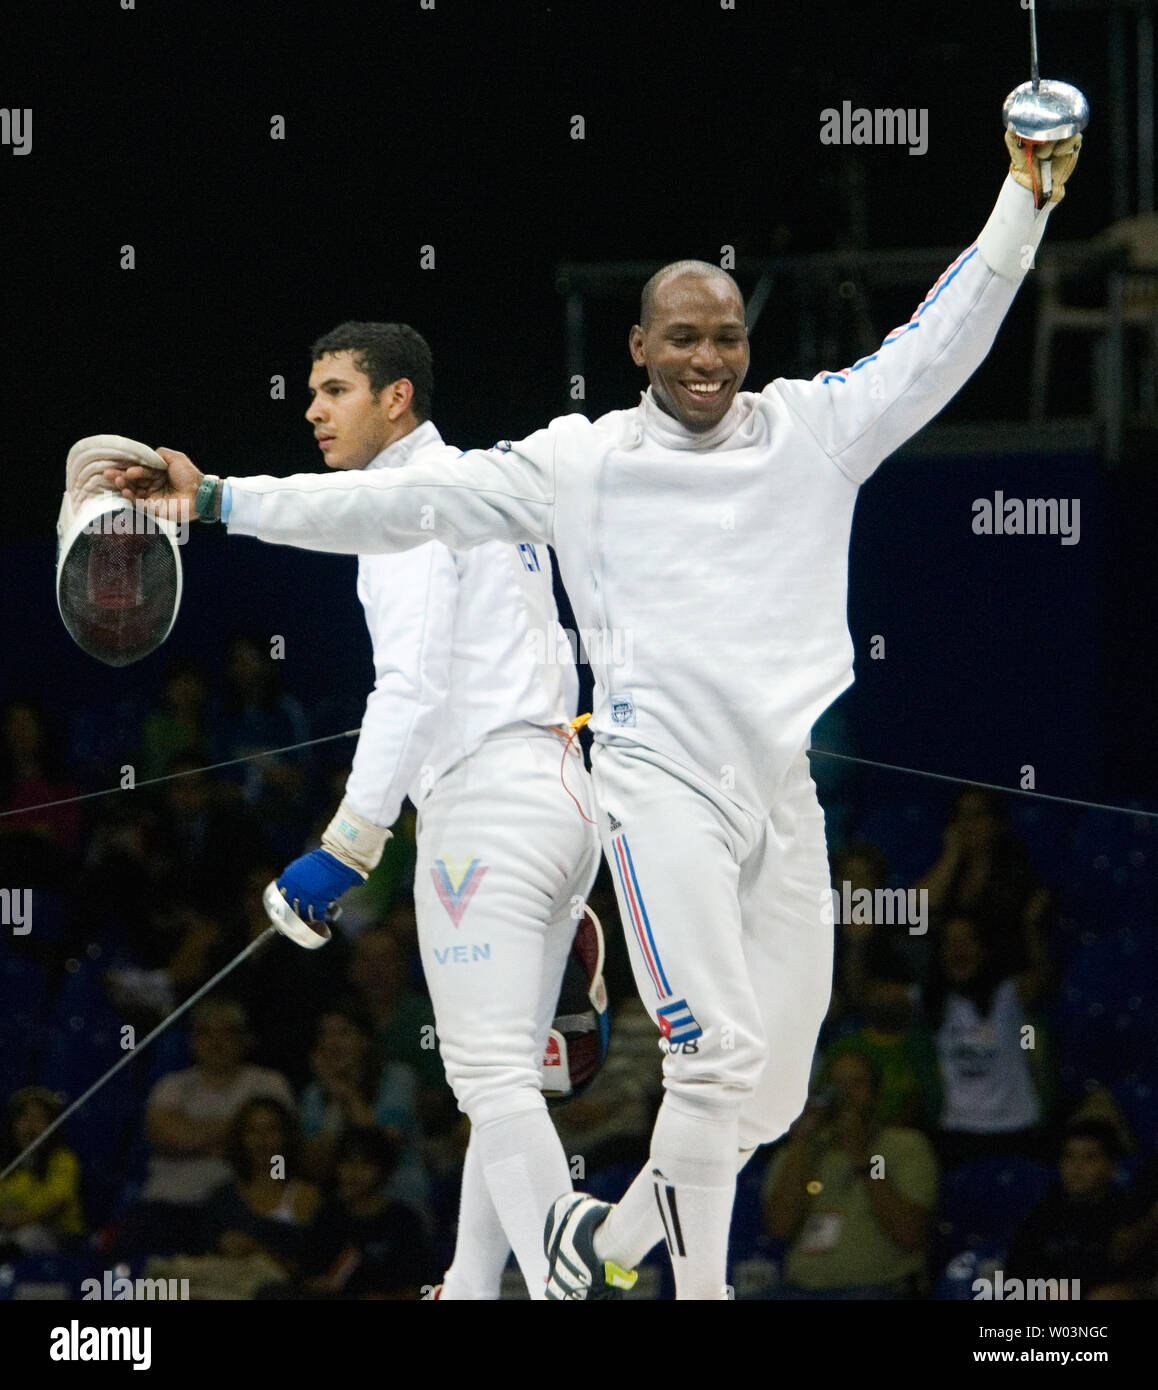 Venezuela's Reuben Limardo (L) looks to the referee as Cuba's Andres Carrillo celebrates a point in men's individual epee at Riocentro during the 2007 Pan Am Games in Rio de Janeiro, Brazil on July 16, 2007. Limardo went on to win gold, beating Carrillo 11-10 in overtime.  (UPI Photo/Heinz Ruckemann) Stock Photo